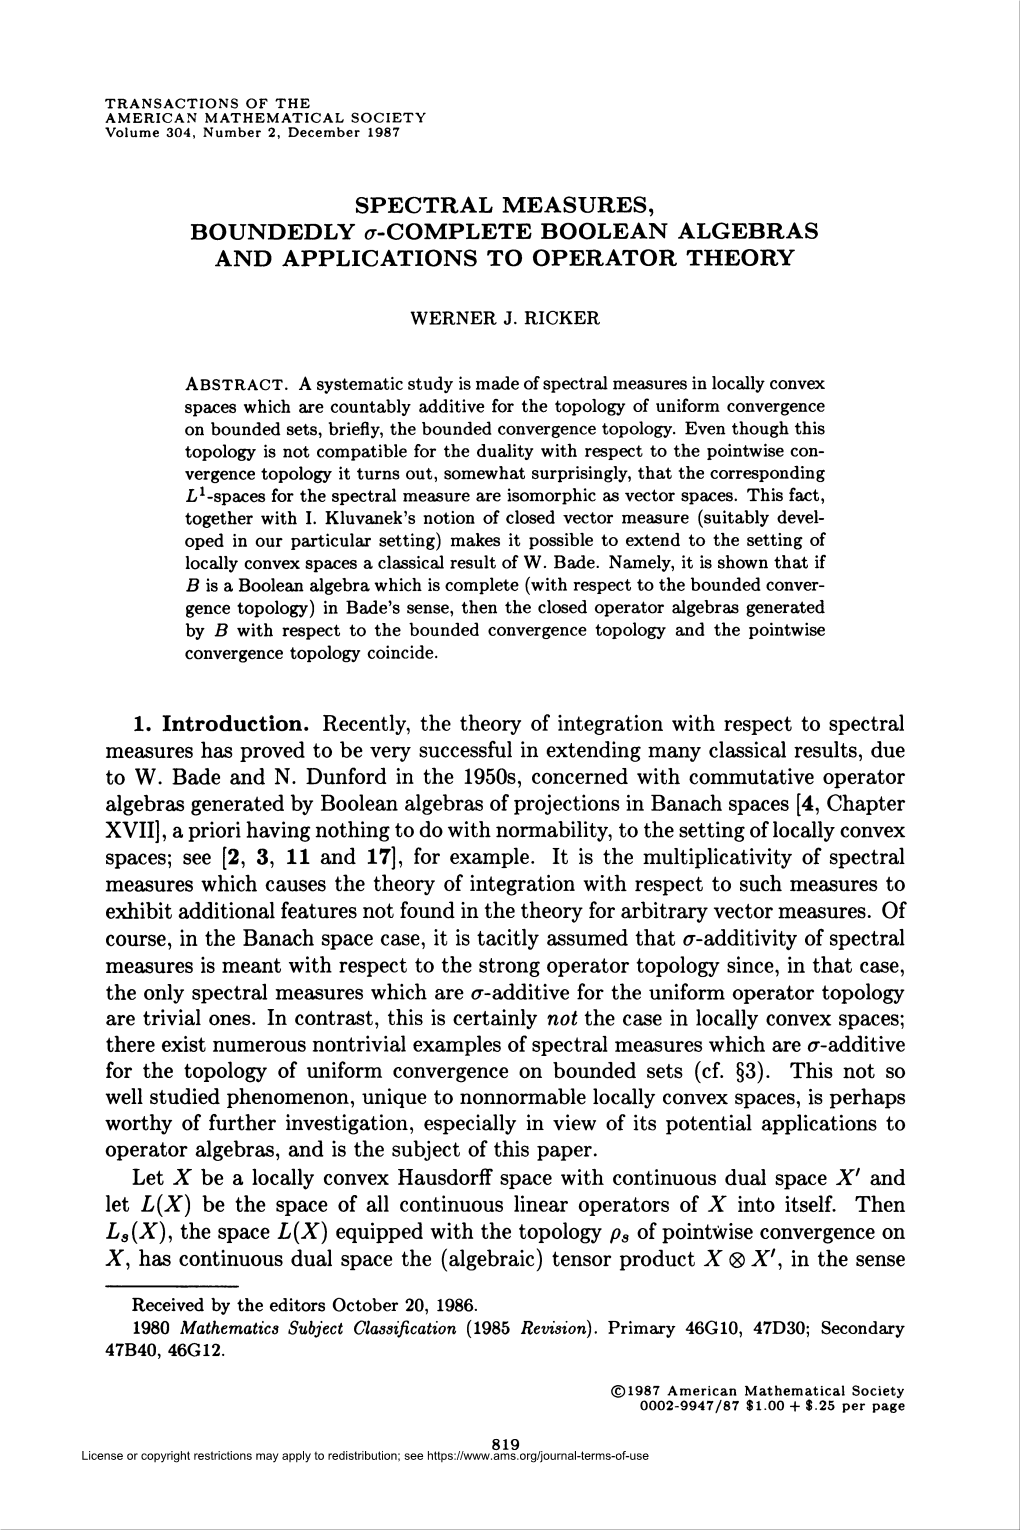 SPECTRAL MEASURES, BOUNDEDLY A-COMPLETE BOOLEAN ALGEBRAS and APPLICATIONS to OPERATOR THEORY